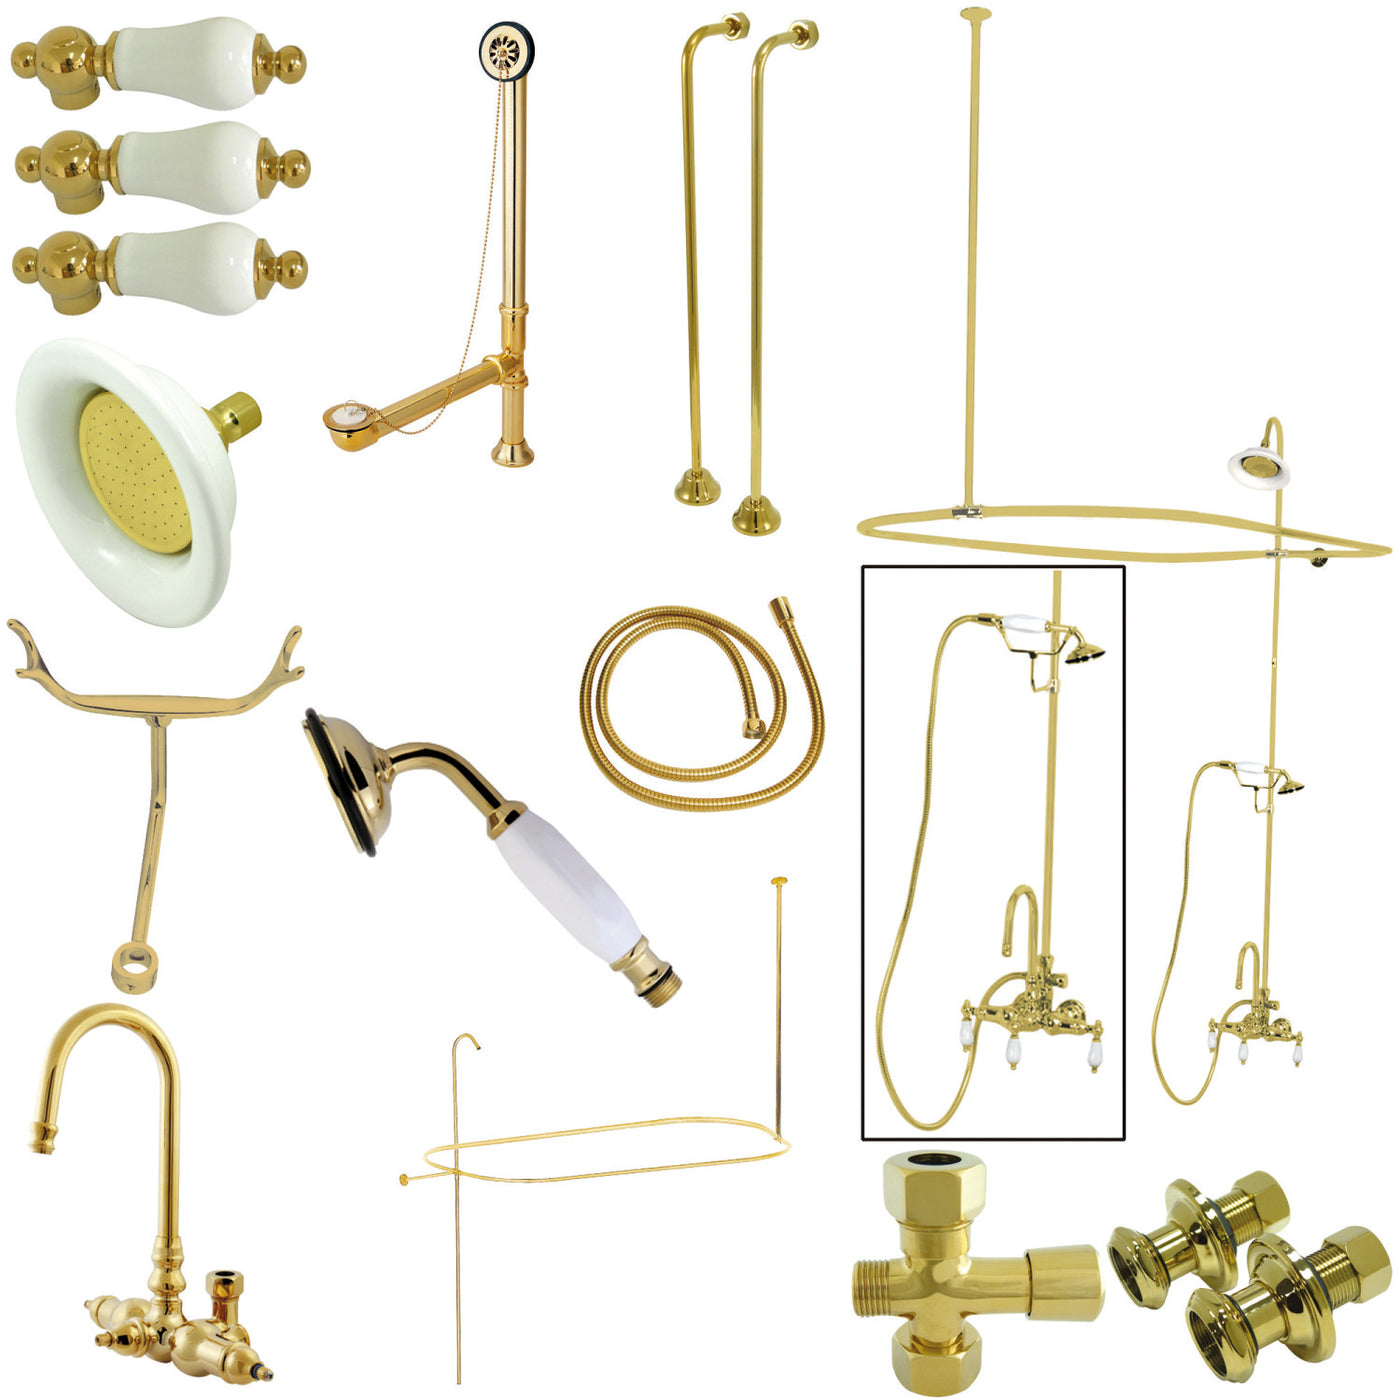 Elements of Design EDK2142PL High-Arc Gooseneck Clawfoot Tub Faucet Package, Polished Brass